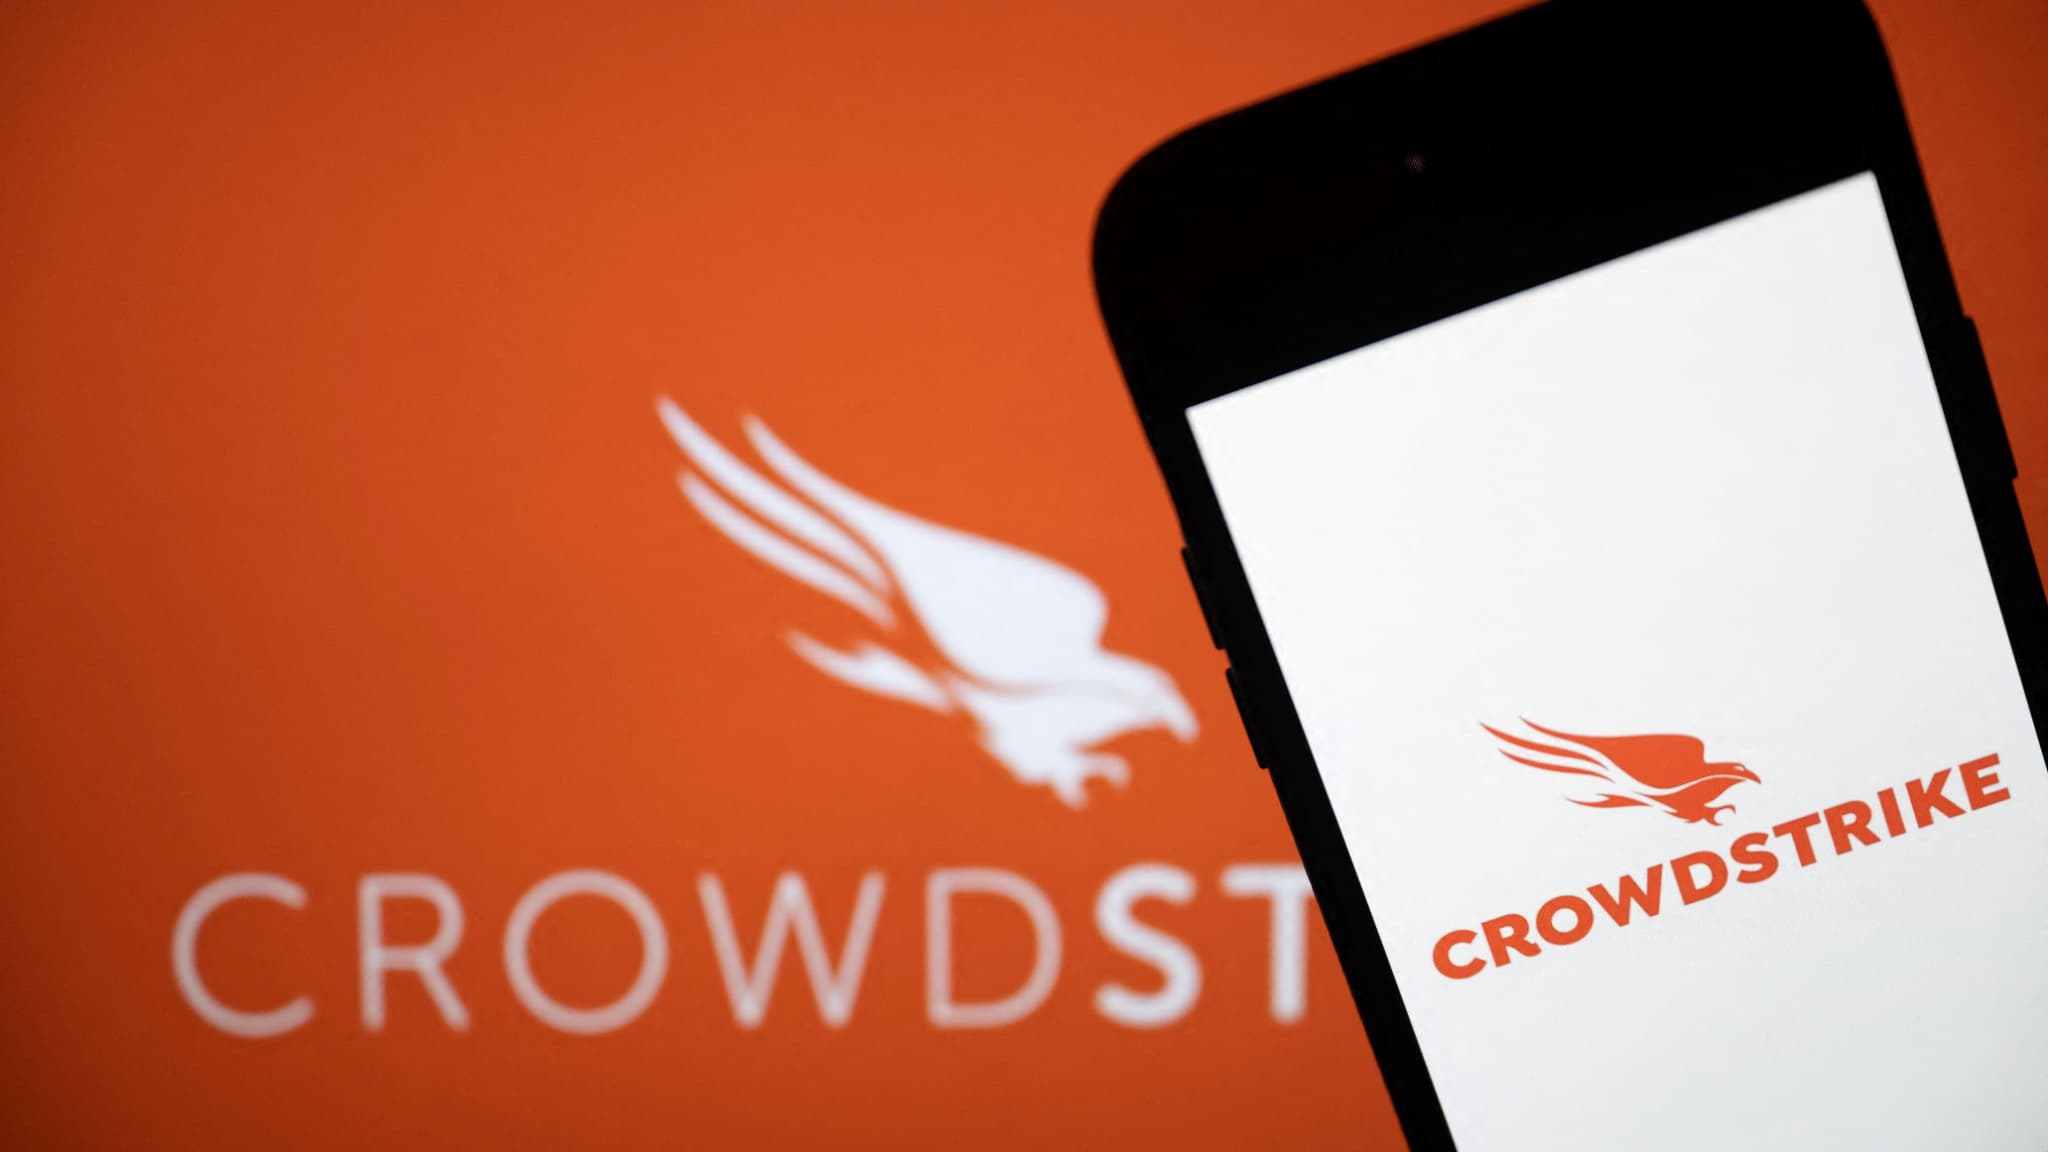 Is the global IT outage caused by Crowdstrike unprecedented?